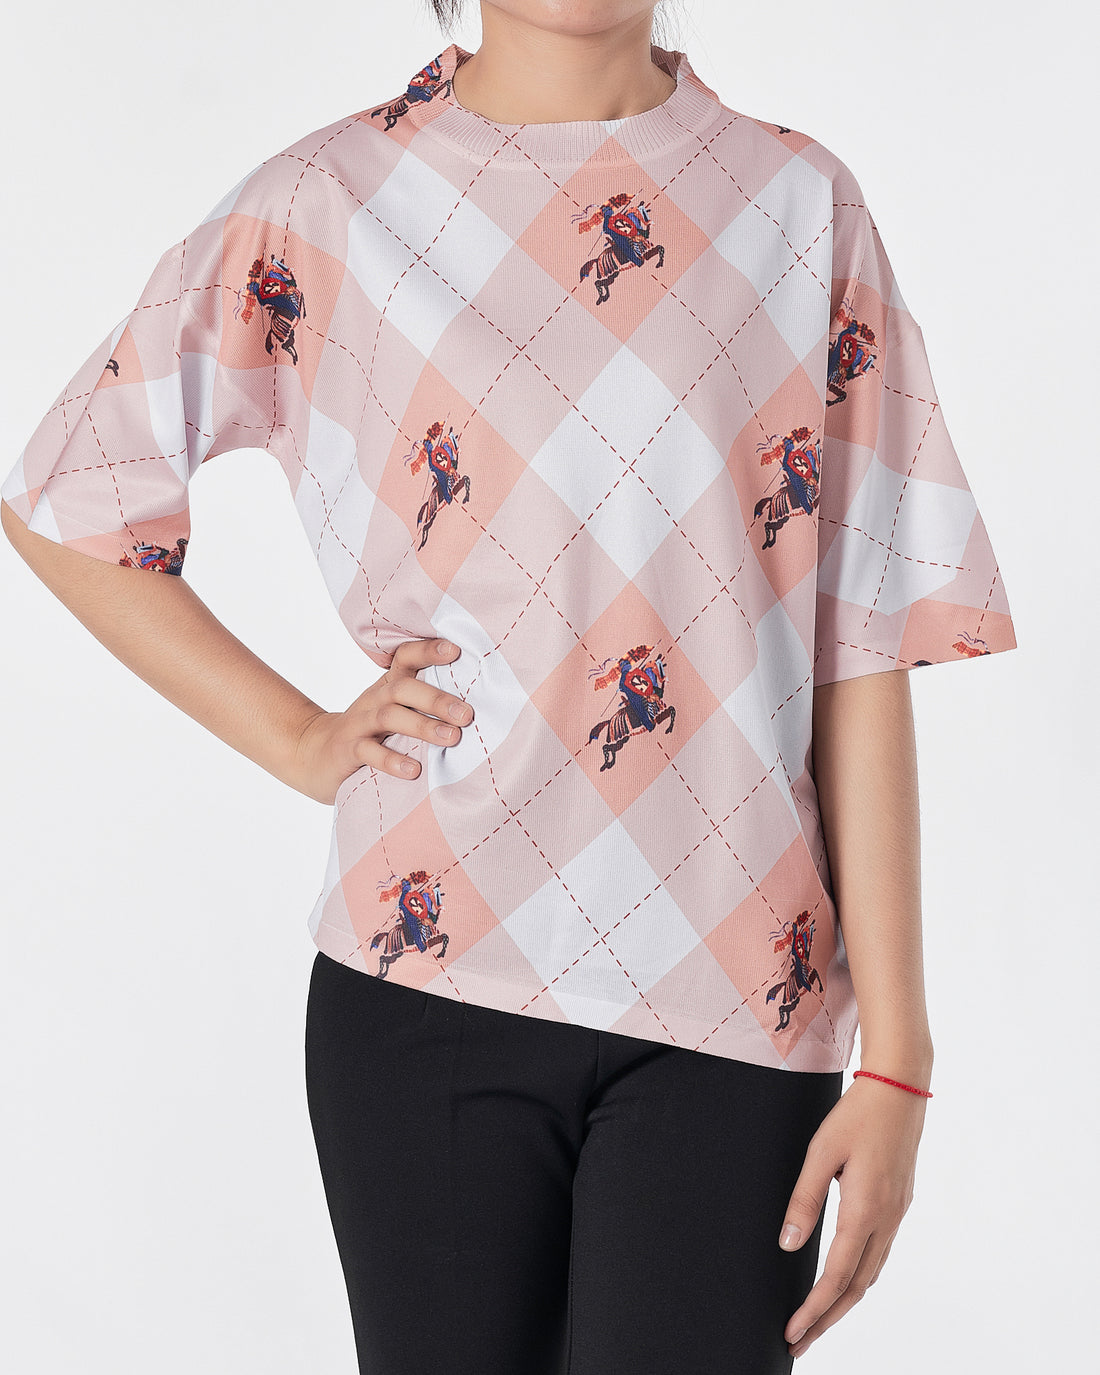 Horse Logo Over Printed Lady T-Shirt 15.90